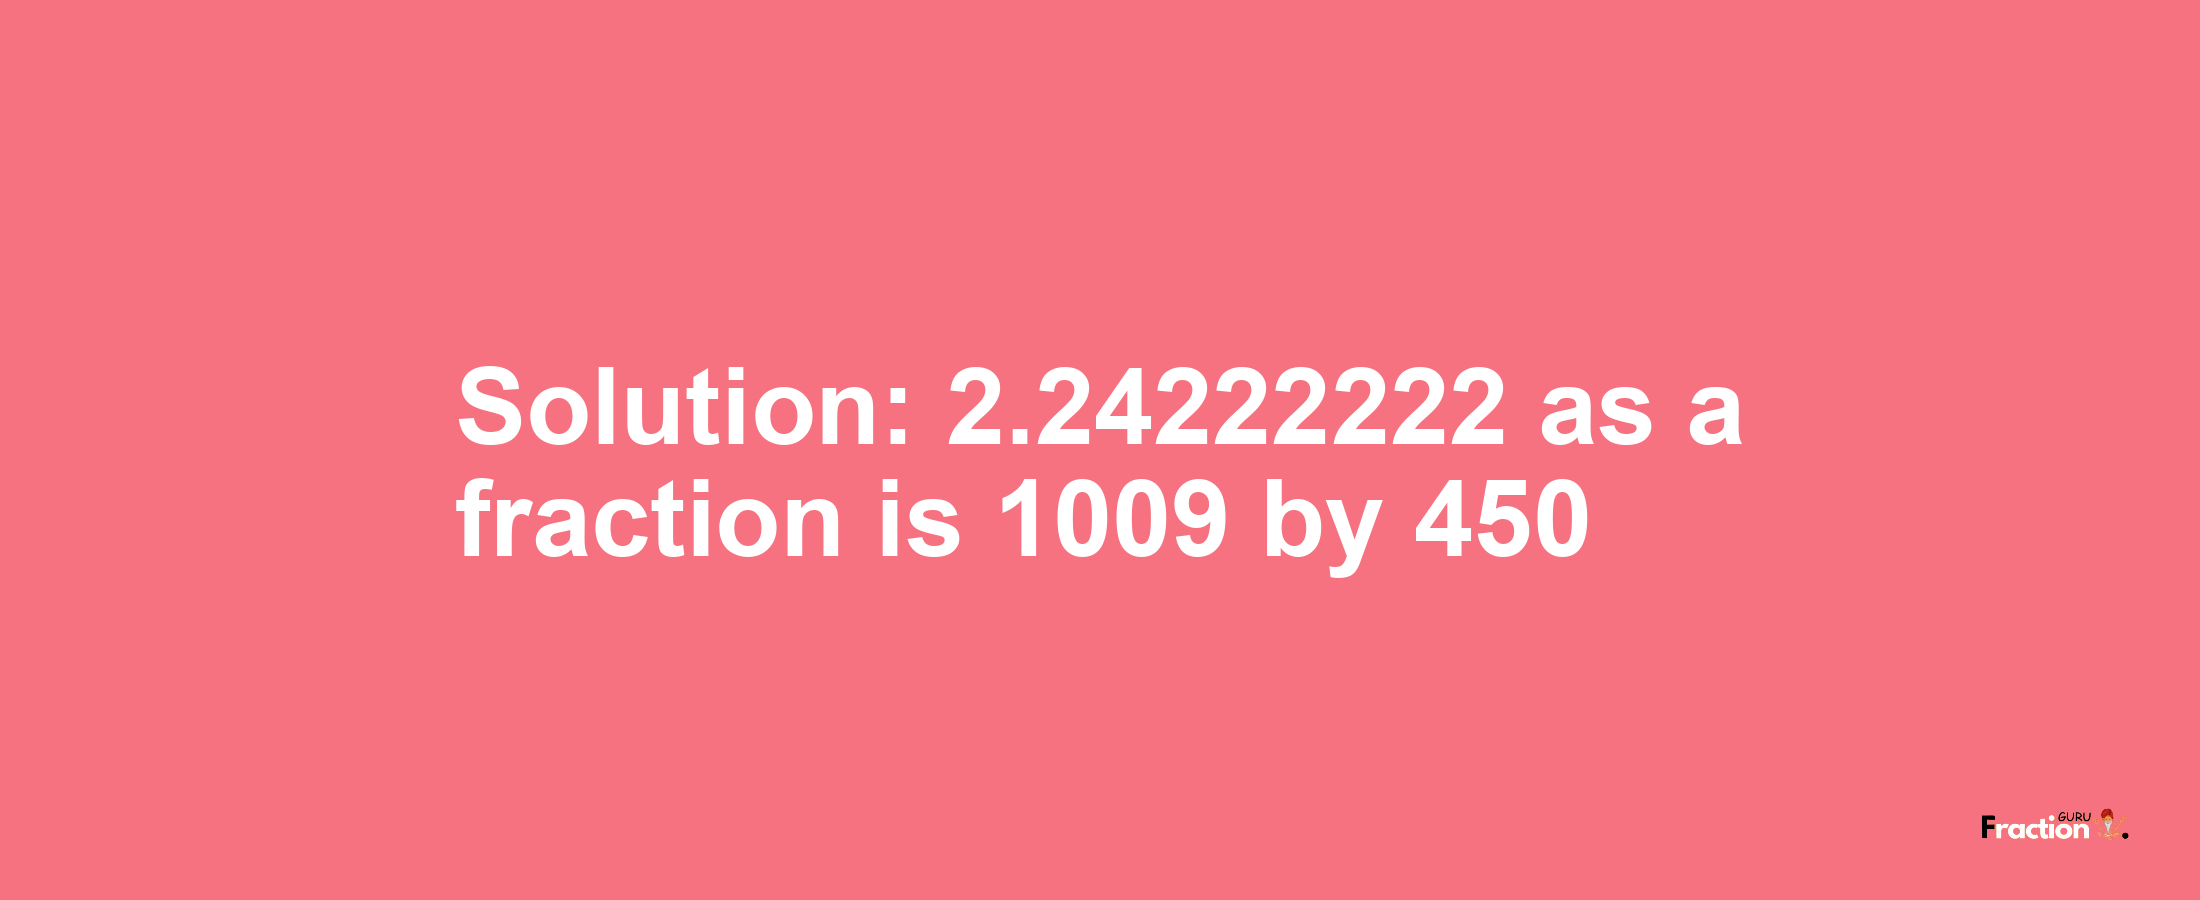 Solution:2.24222222 as a fraction is 1009/450